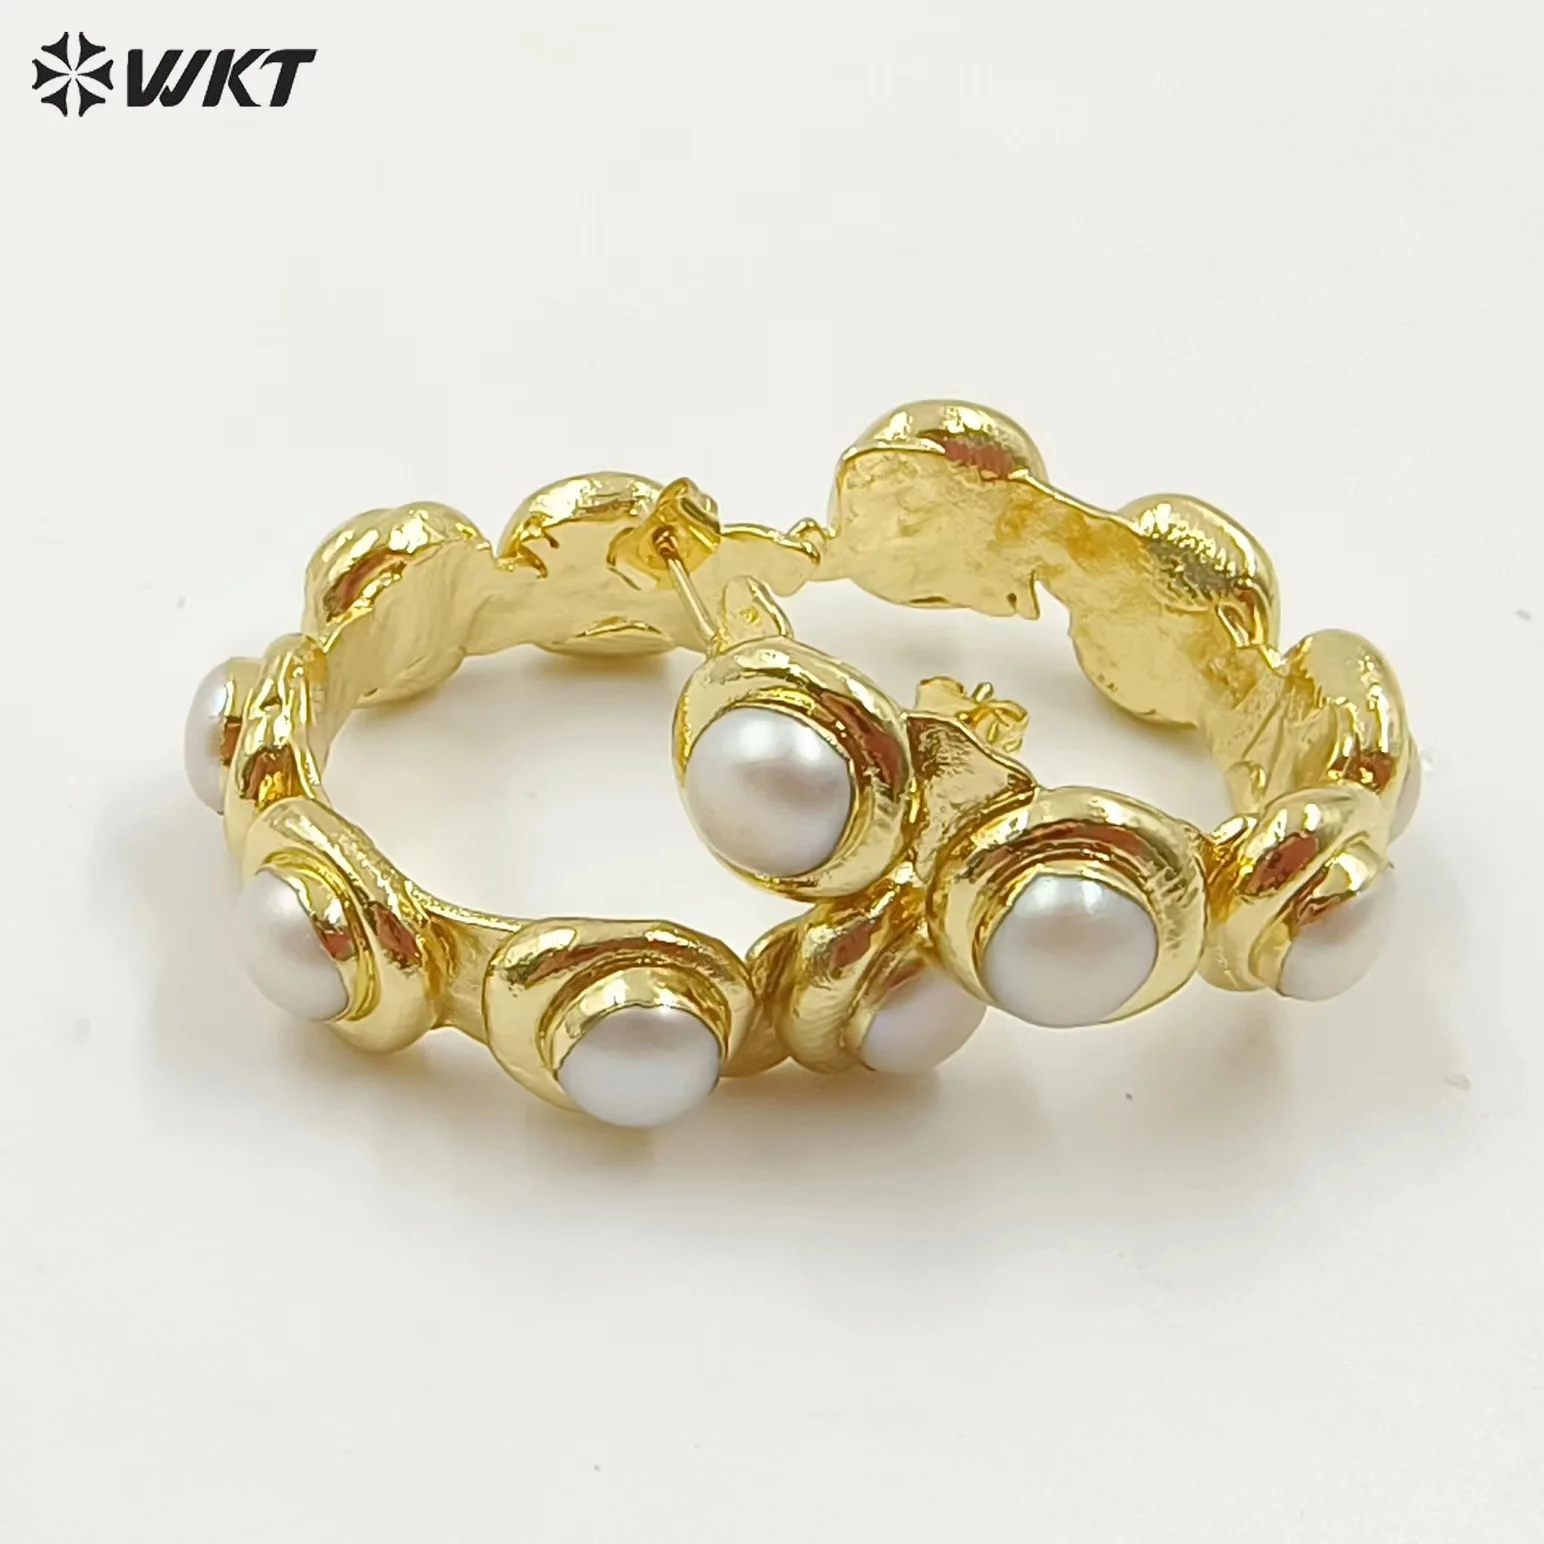 

WT-MPE054 Amazing Gorgeous Gold Electroplated Assemble Natural Freshwater Pearl Hoop Earrings Studs For Women In C Shape